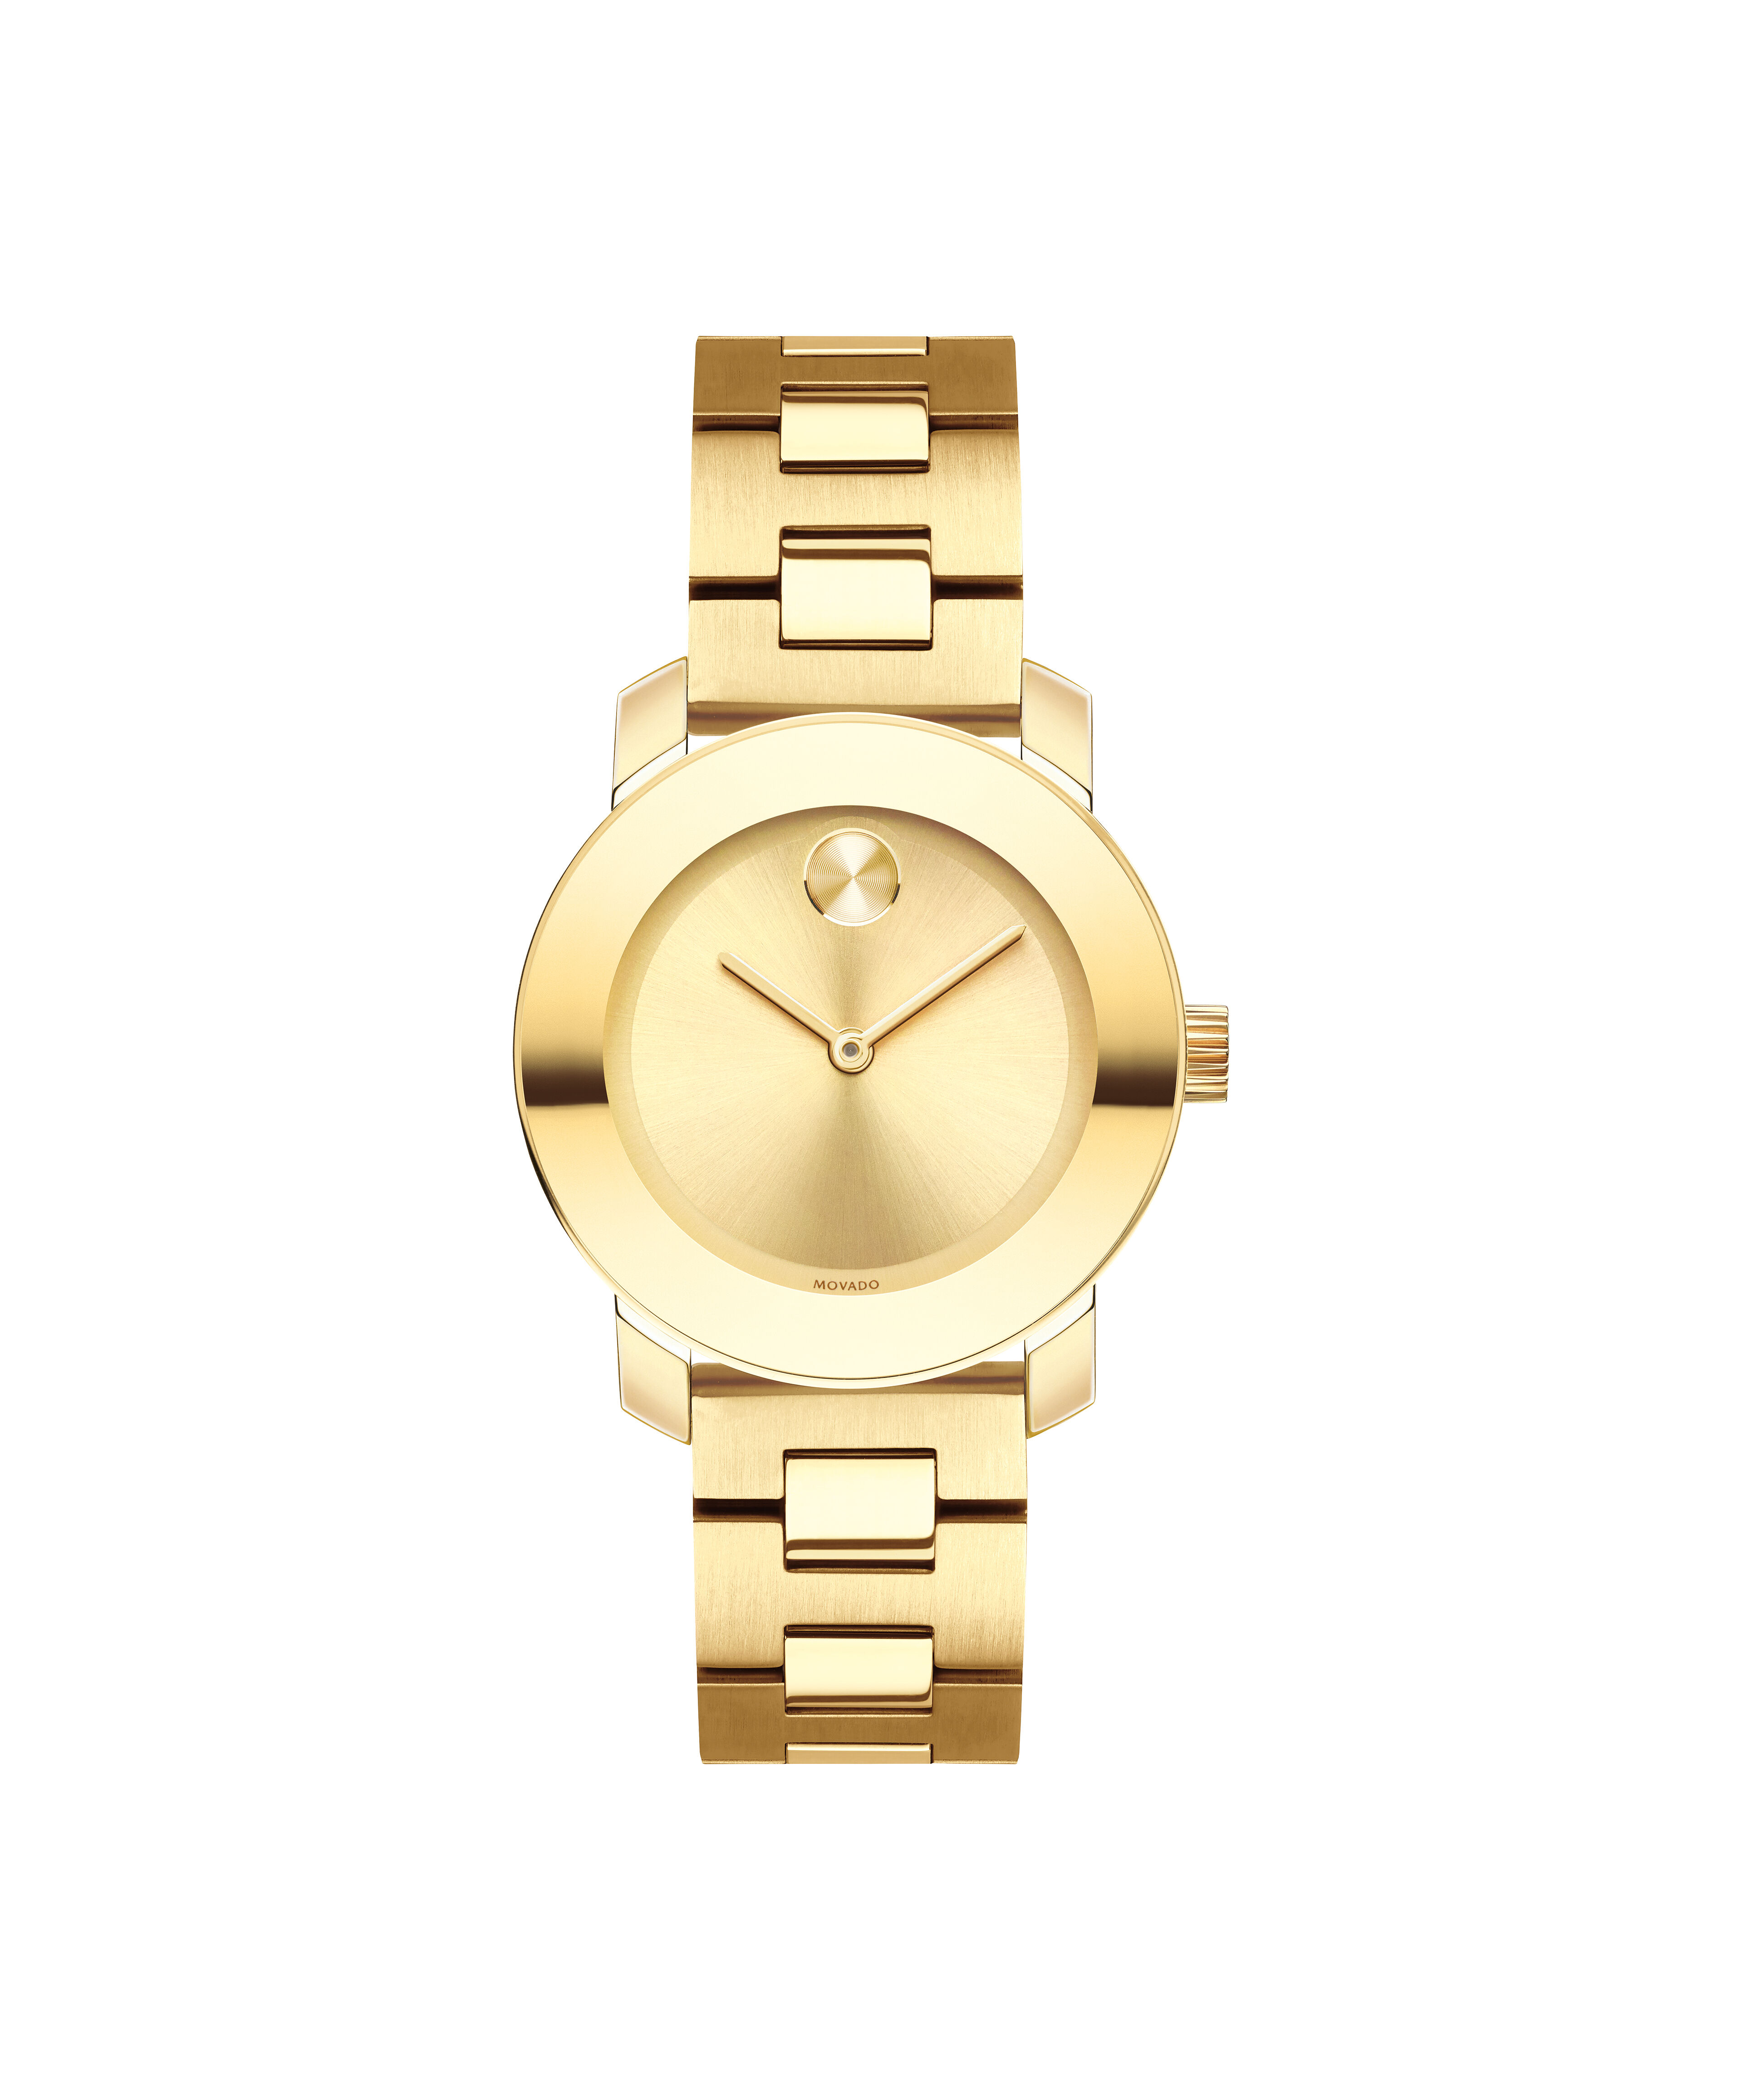 Movado MUSEUM CLASSIC Yellow Gold Plated Stainless Steel Watch 0607351